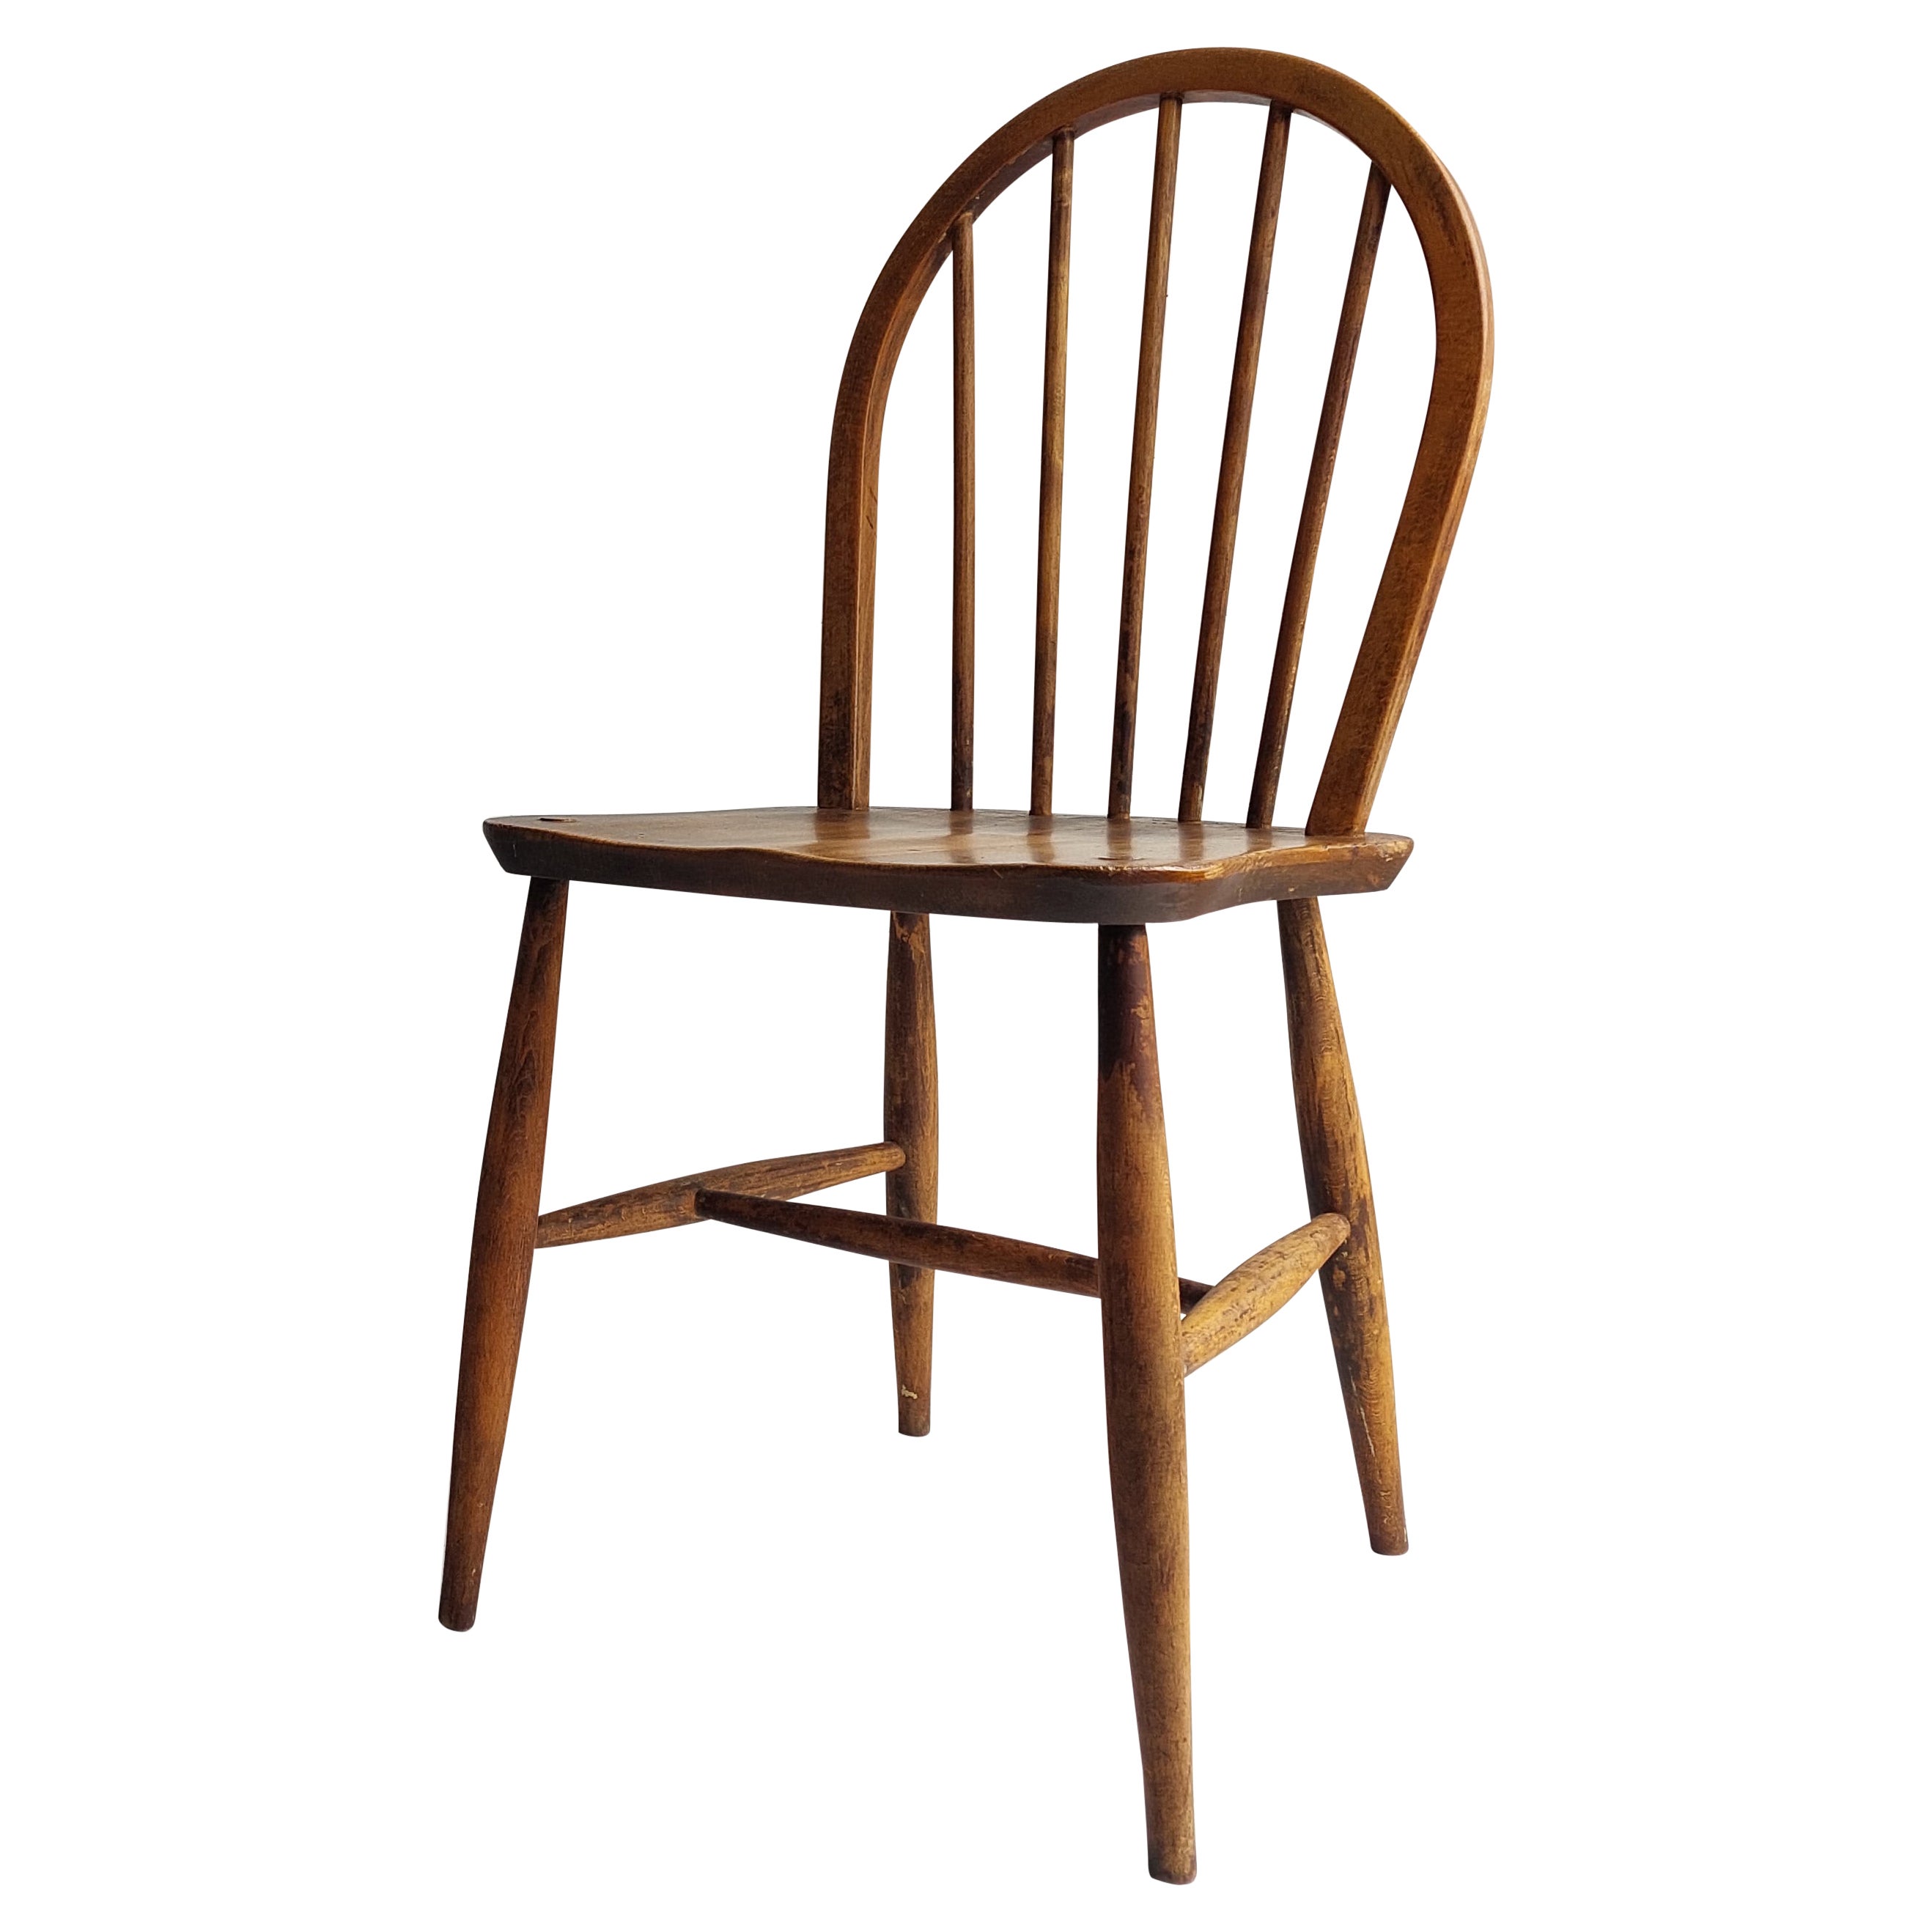 Midcentury Ercol Windsor Kitchen Chair 'Model No. 4a or No. 100', 50s